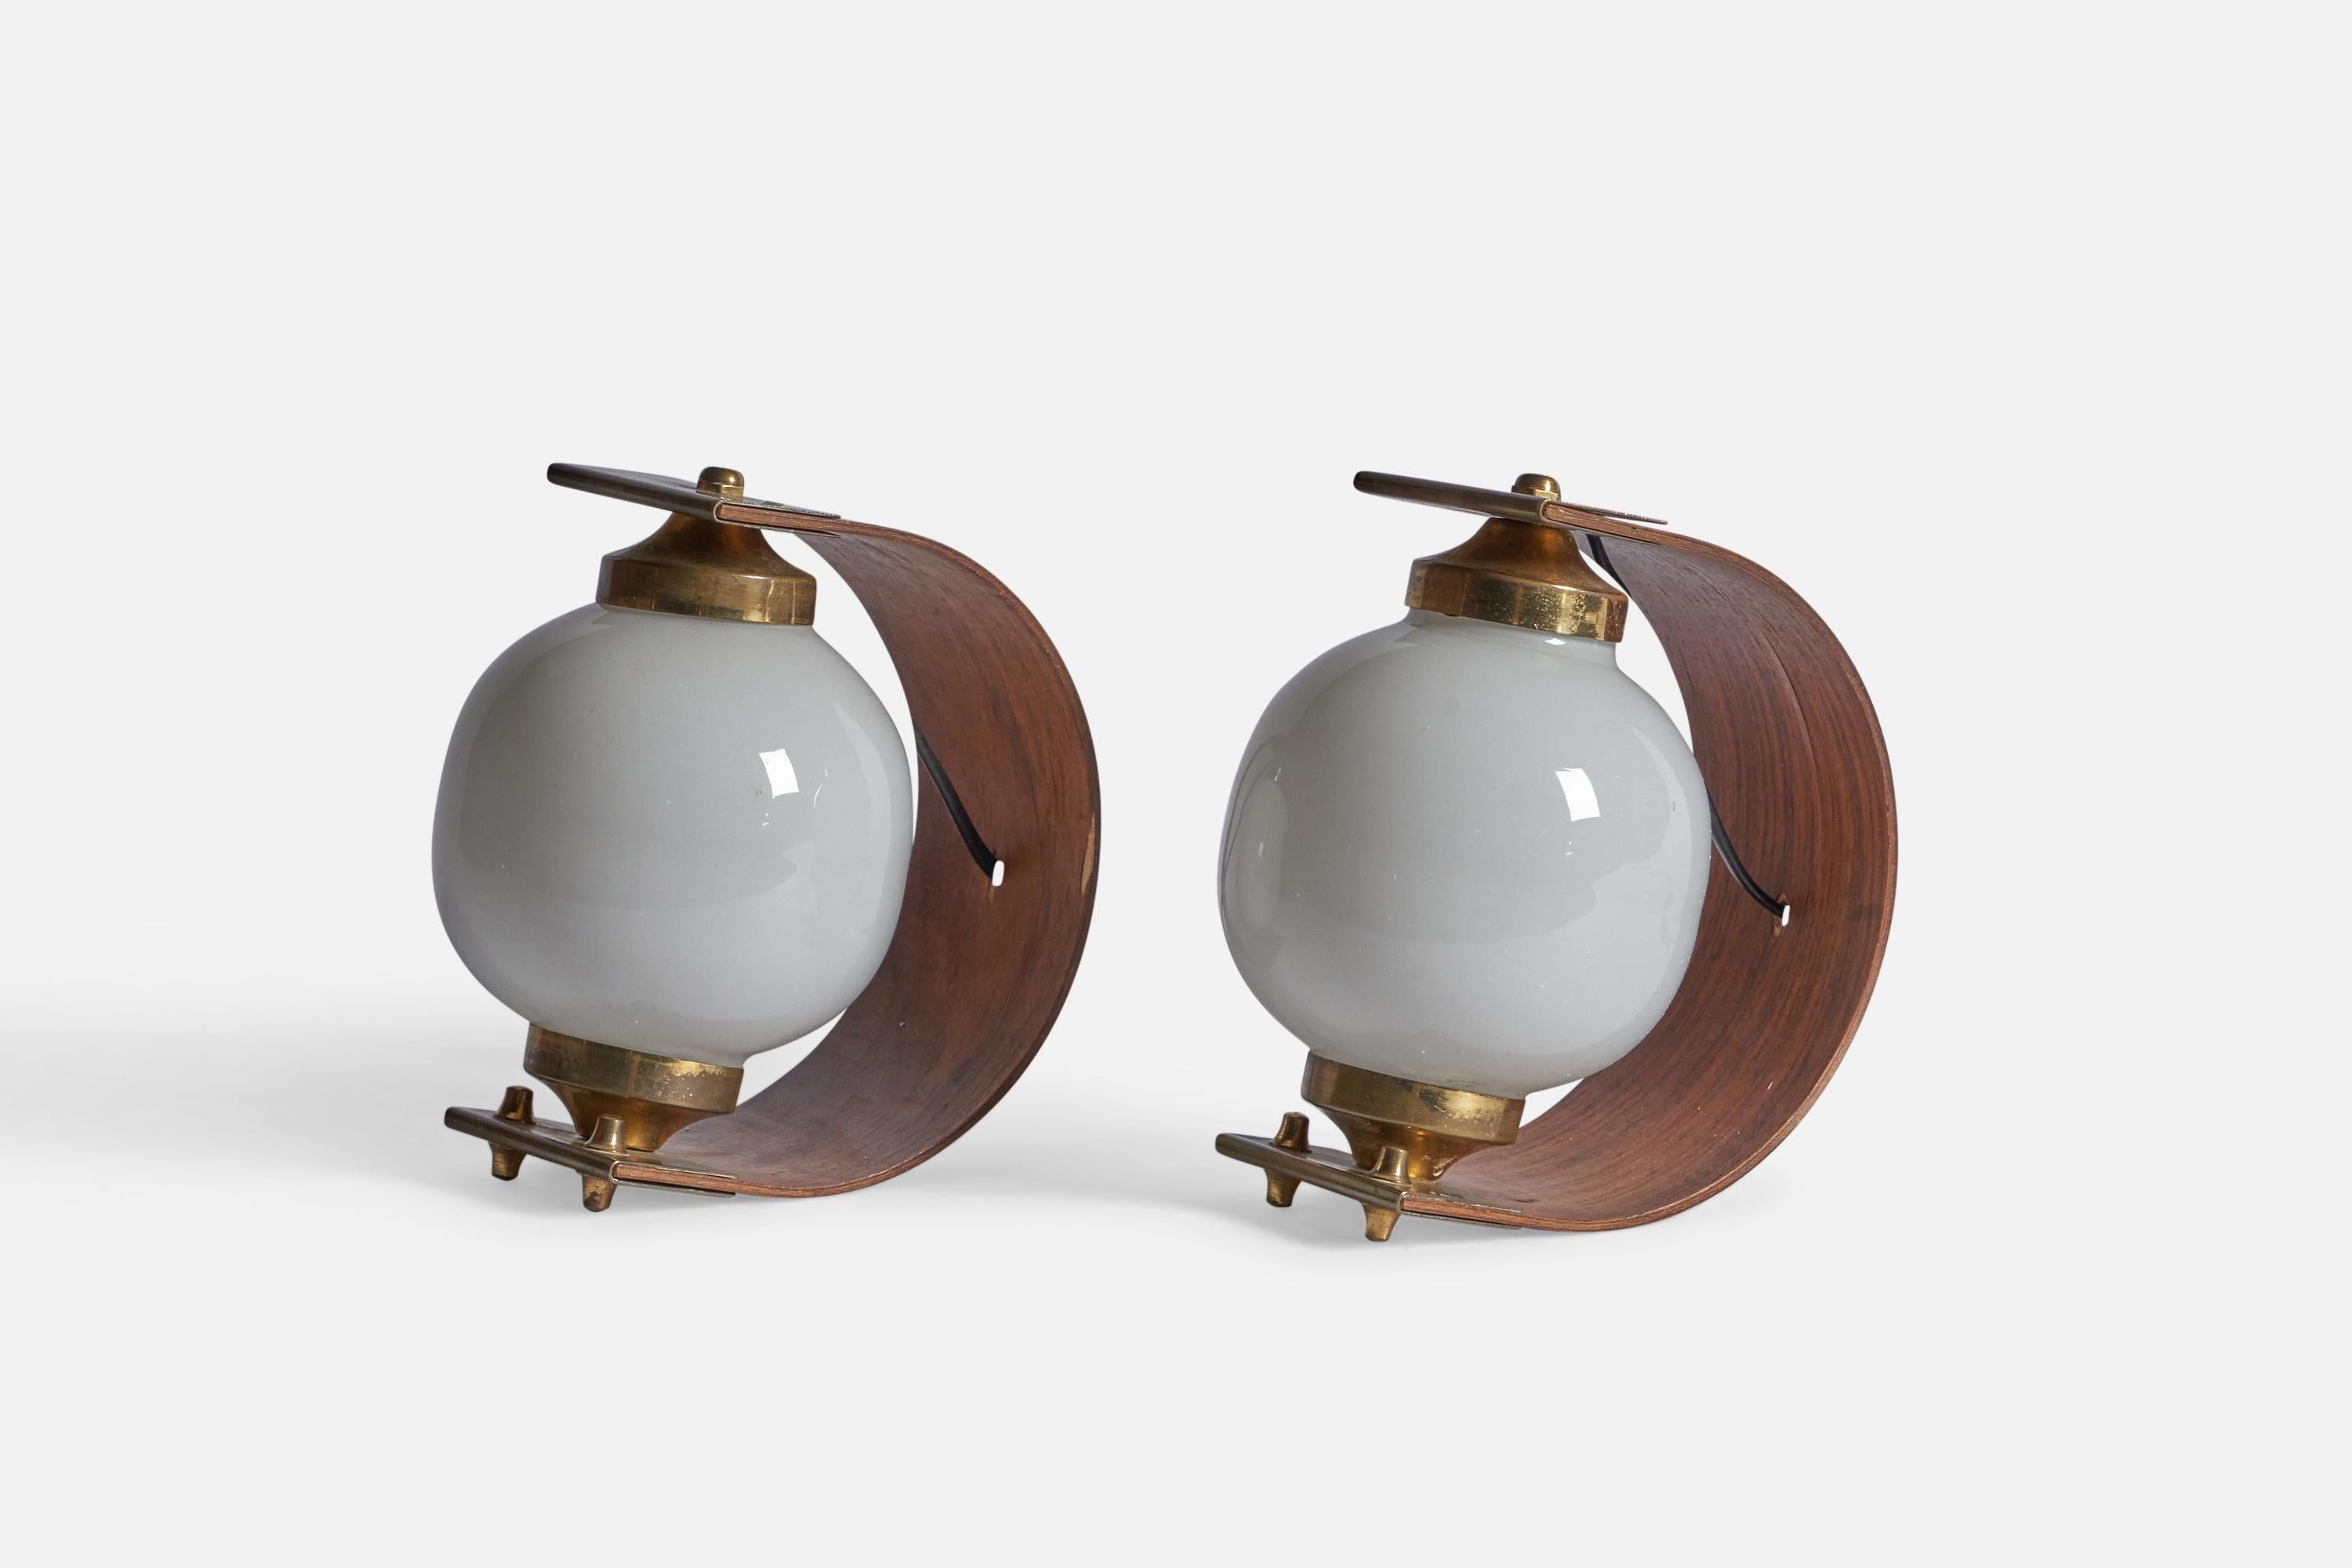 A pair of brass, glass and moulded plywood table lamps, designed and produced in Italy, c. 1950s.